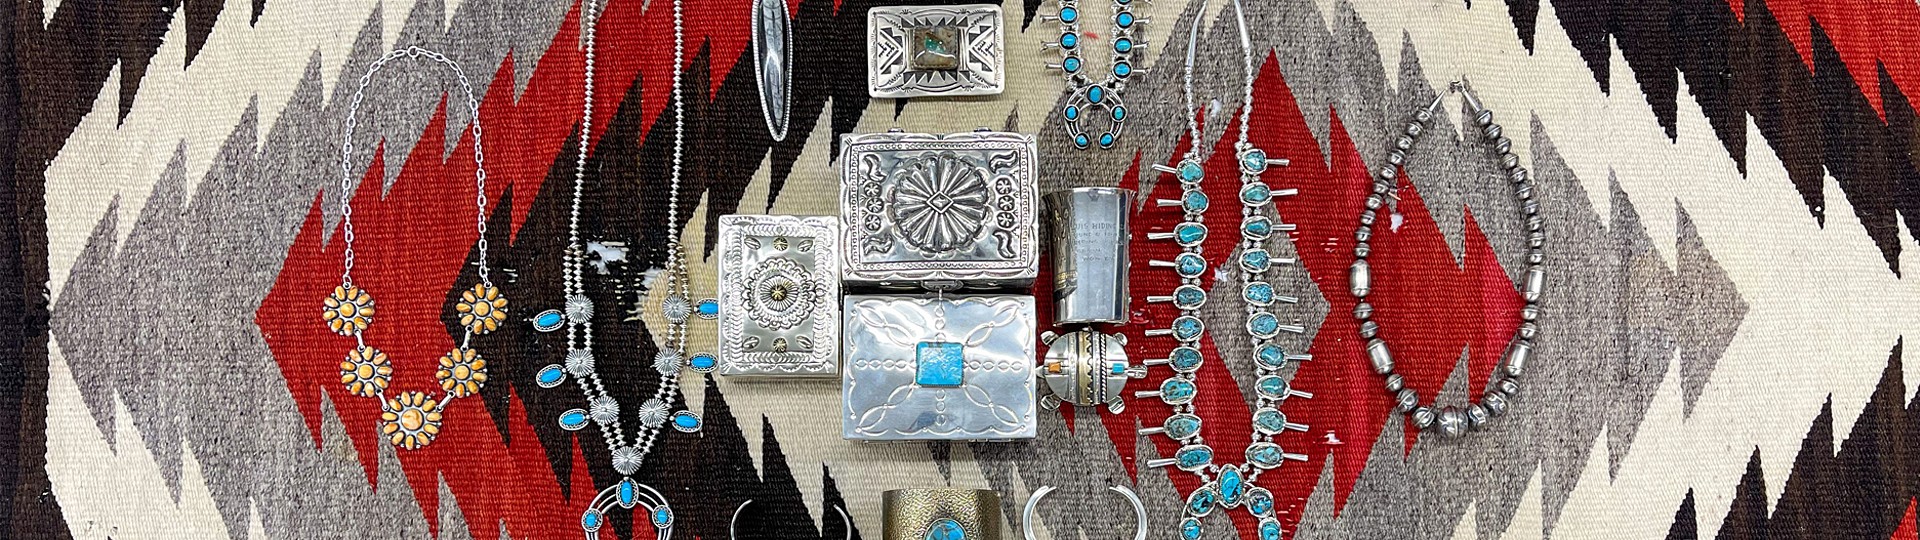 June Western & American Indian Auction w/ Luxury Jewelry by North American Auction Company